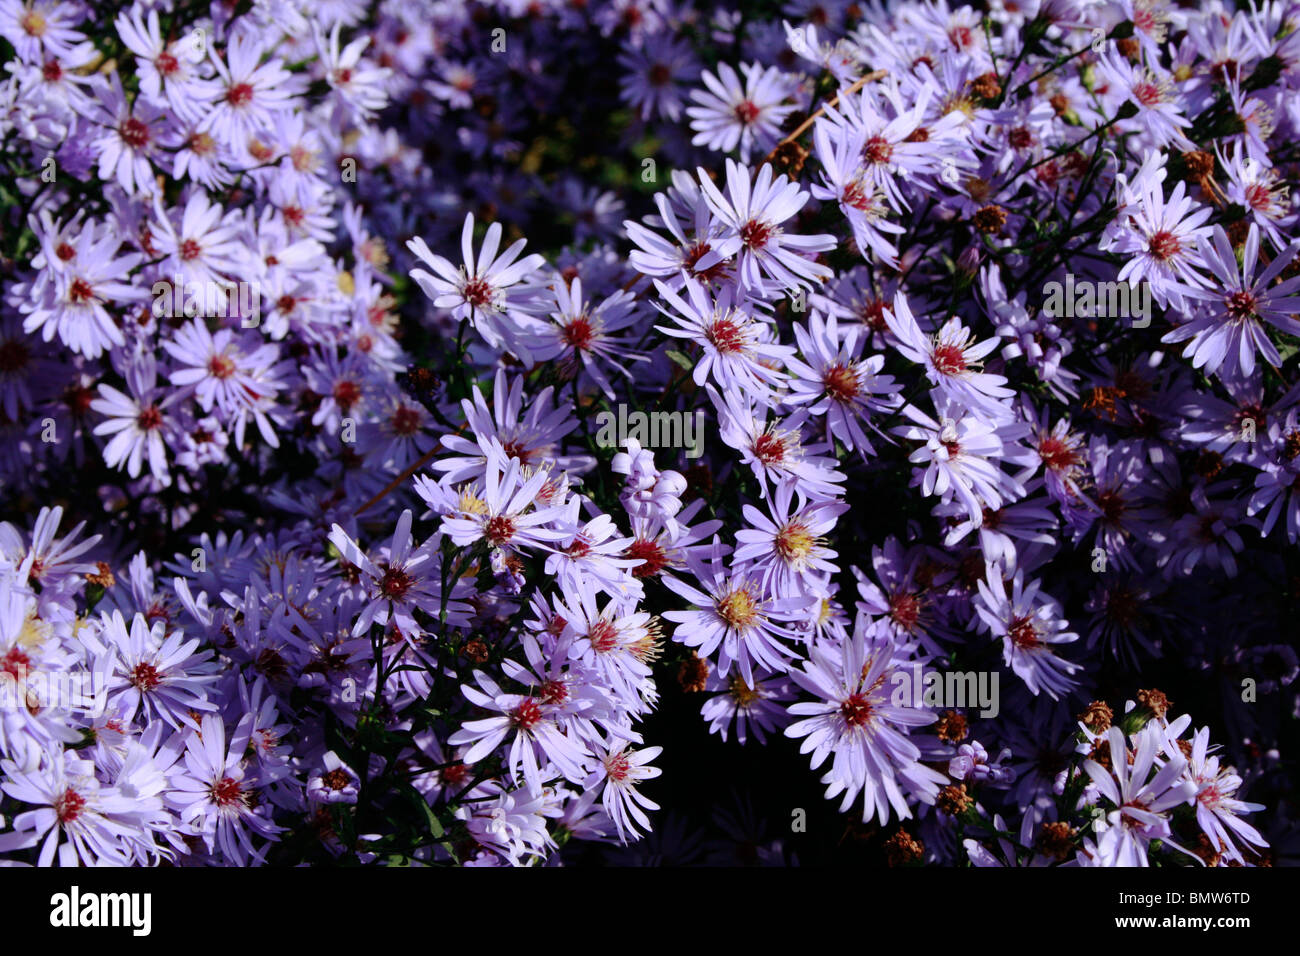 Purple Asters / Michaelmas Daisies ( Aster laevis 'Calliope' ) flowering in the late Summer / Autumn. Stock Photo